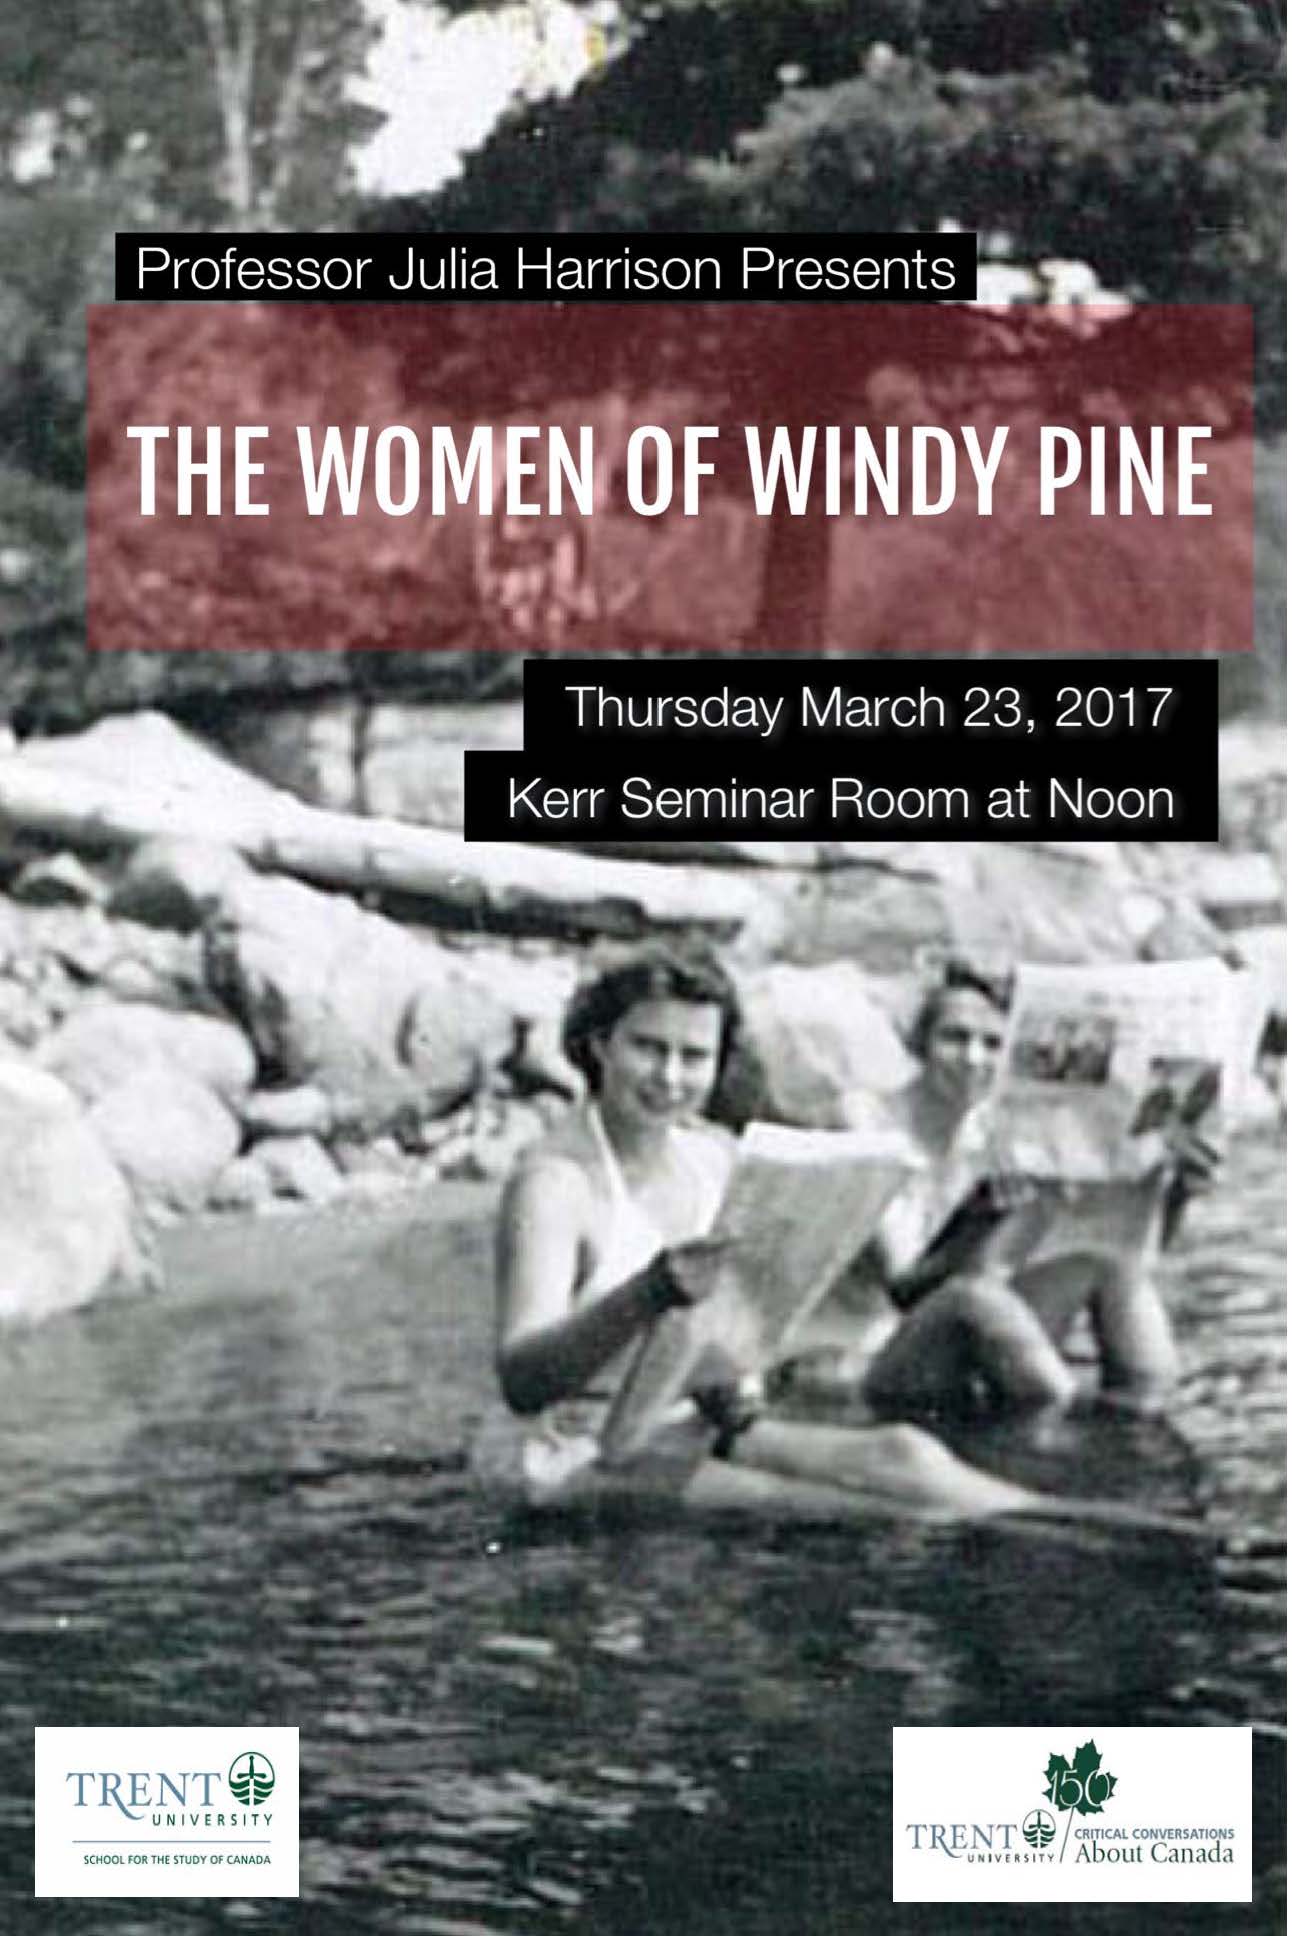 "The Women of Windy Pine" with Julia Harrison 23 March 2017